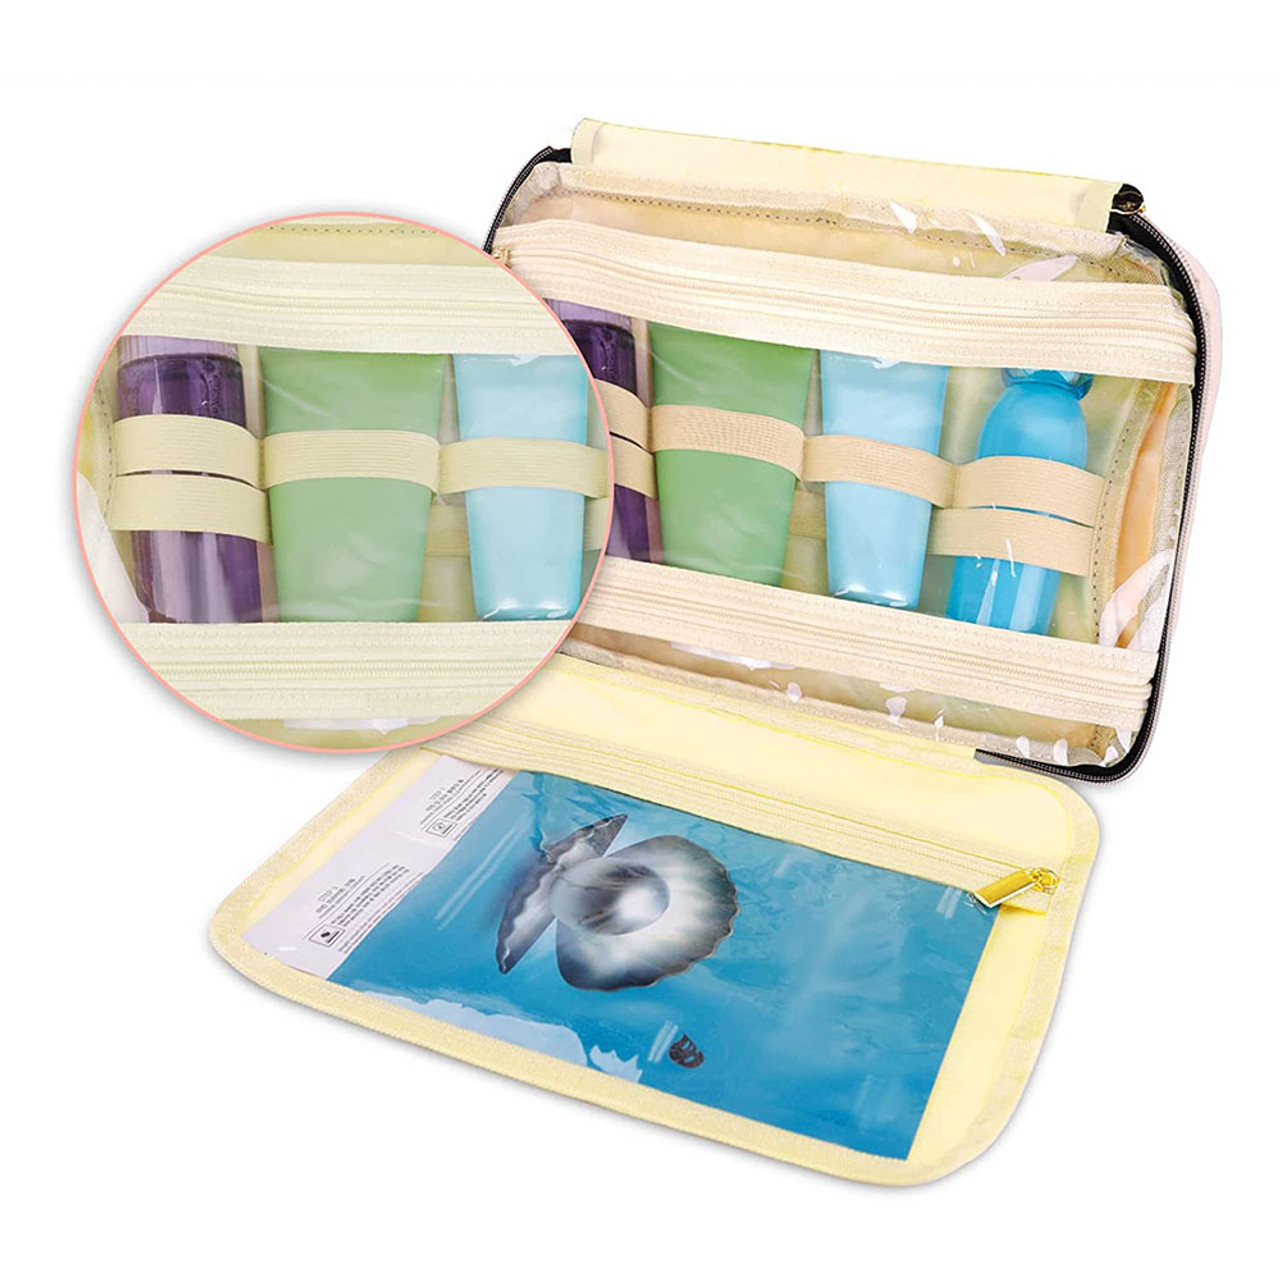 Hanging Toiletry Bag for Women product image